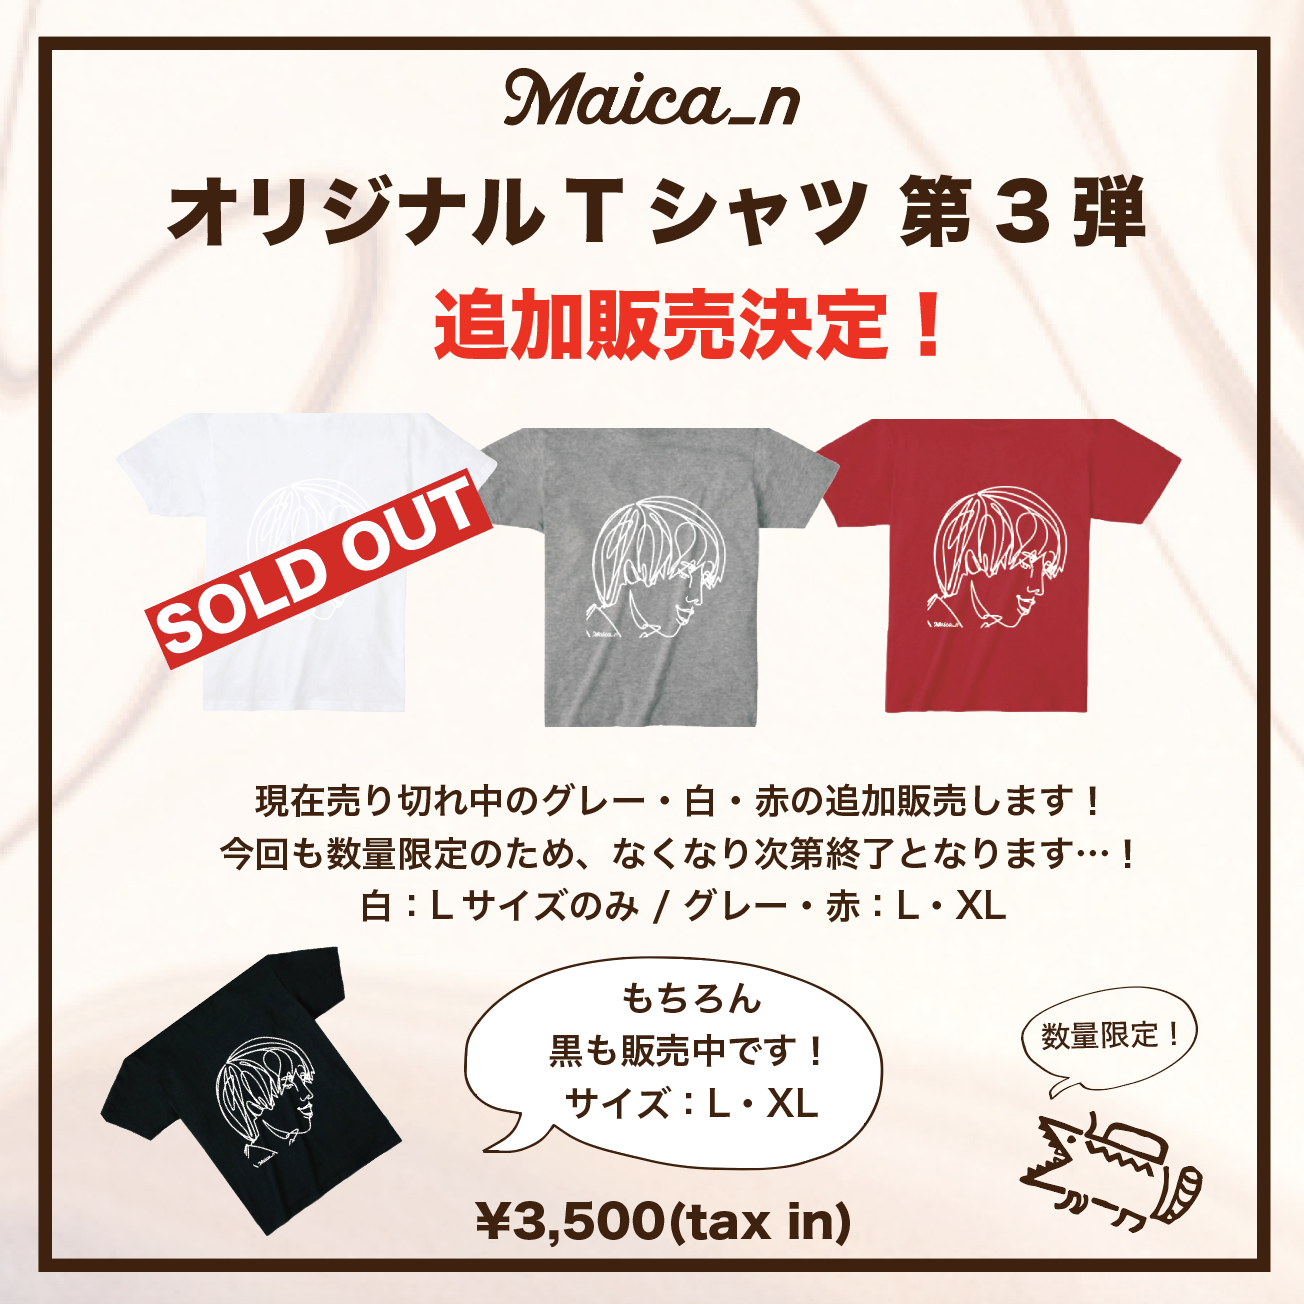 Tシャツ追加！